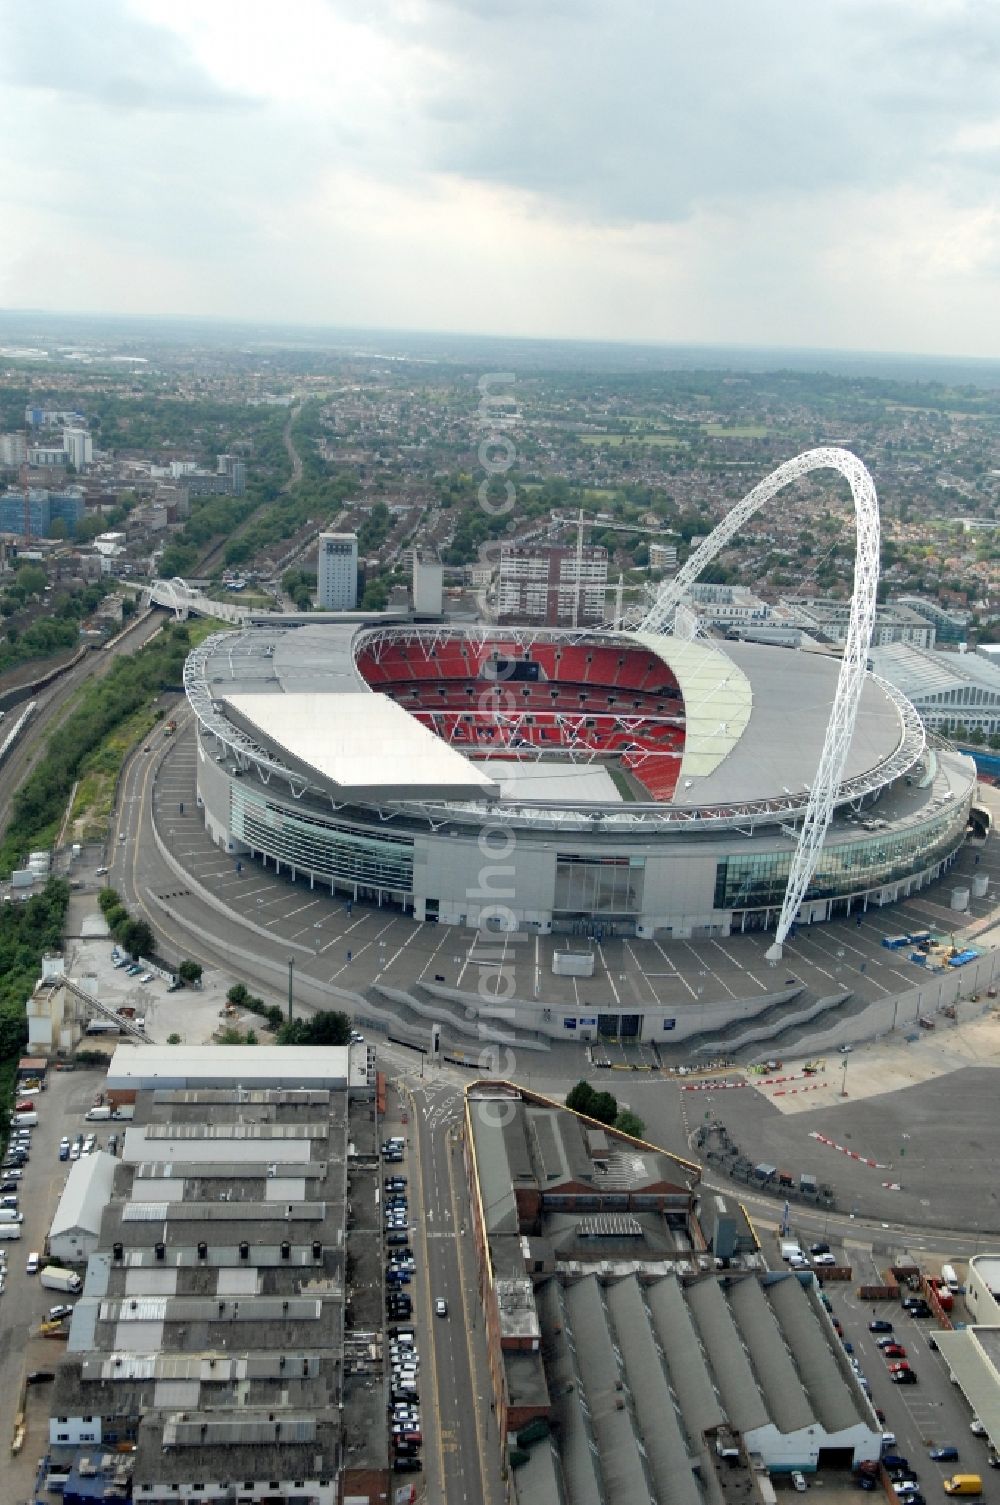 Aerial image London - Sports facility grounds of the Arena Wembley - stadium in London in England, United Kingdom